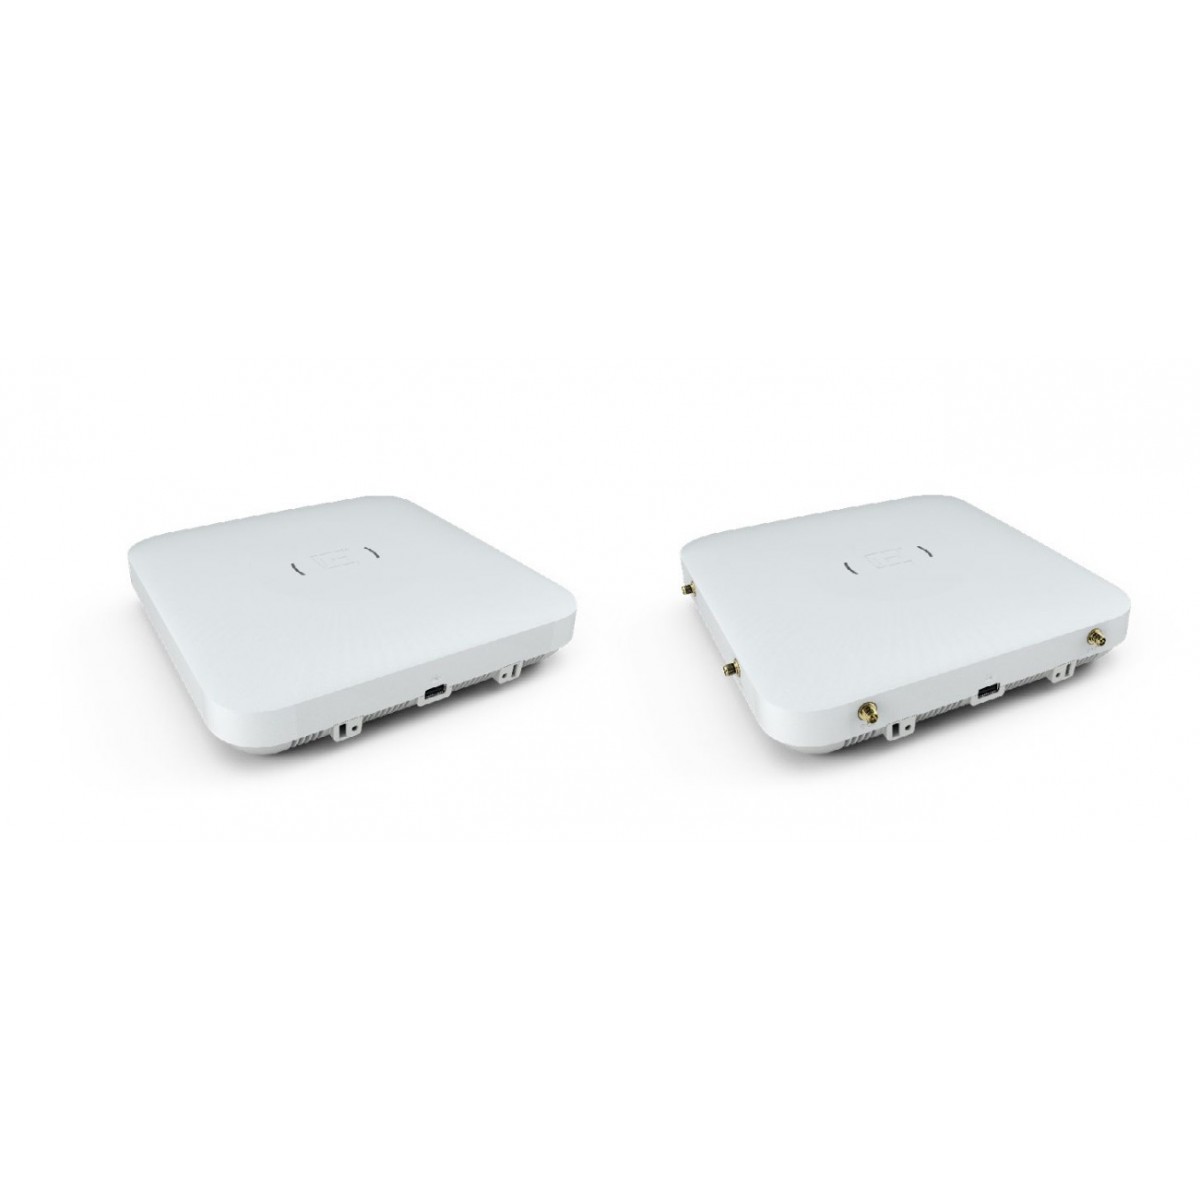 Extreme Networks Cloud 2x5GHZ Dual band SEN - Access Point - Power over Ethernet